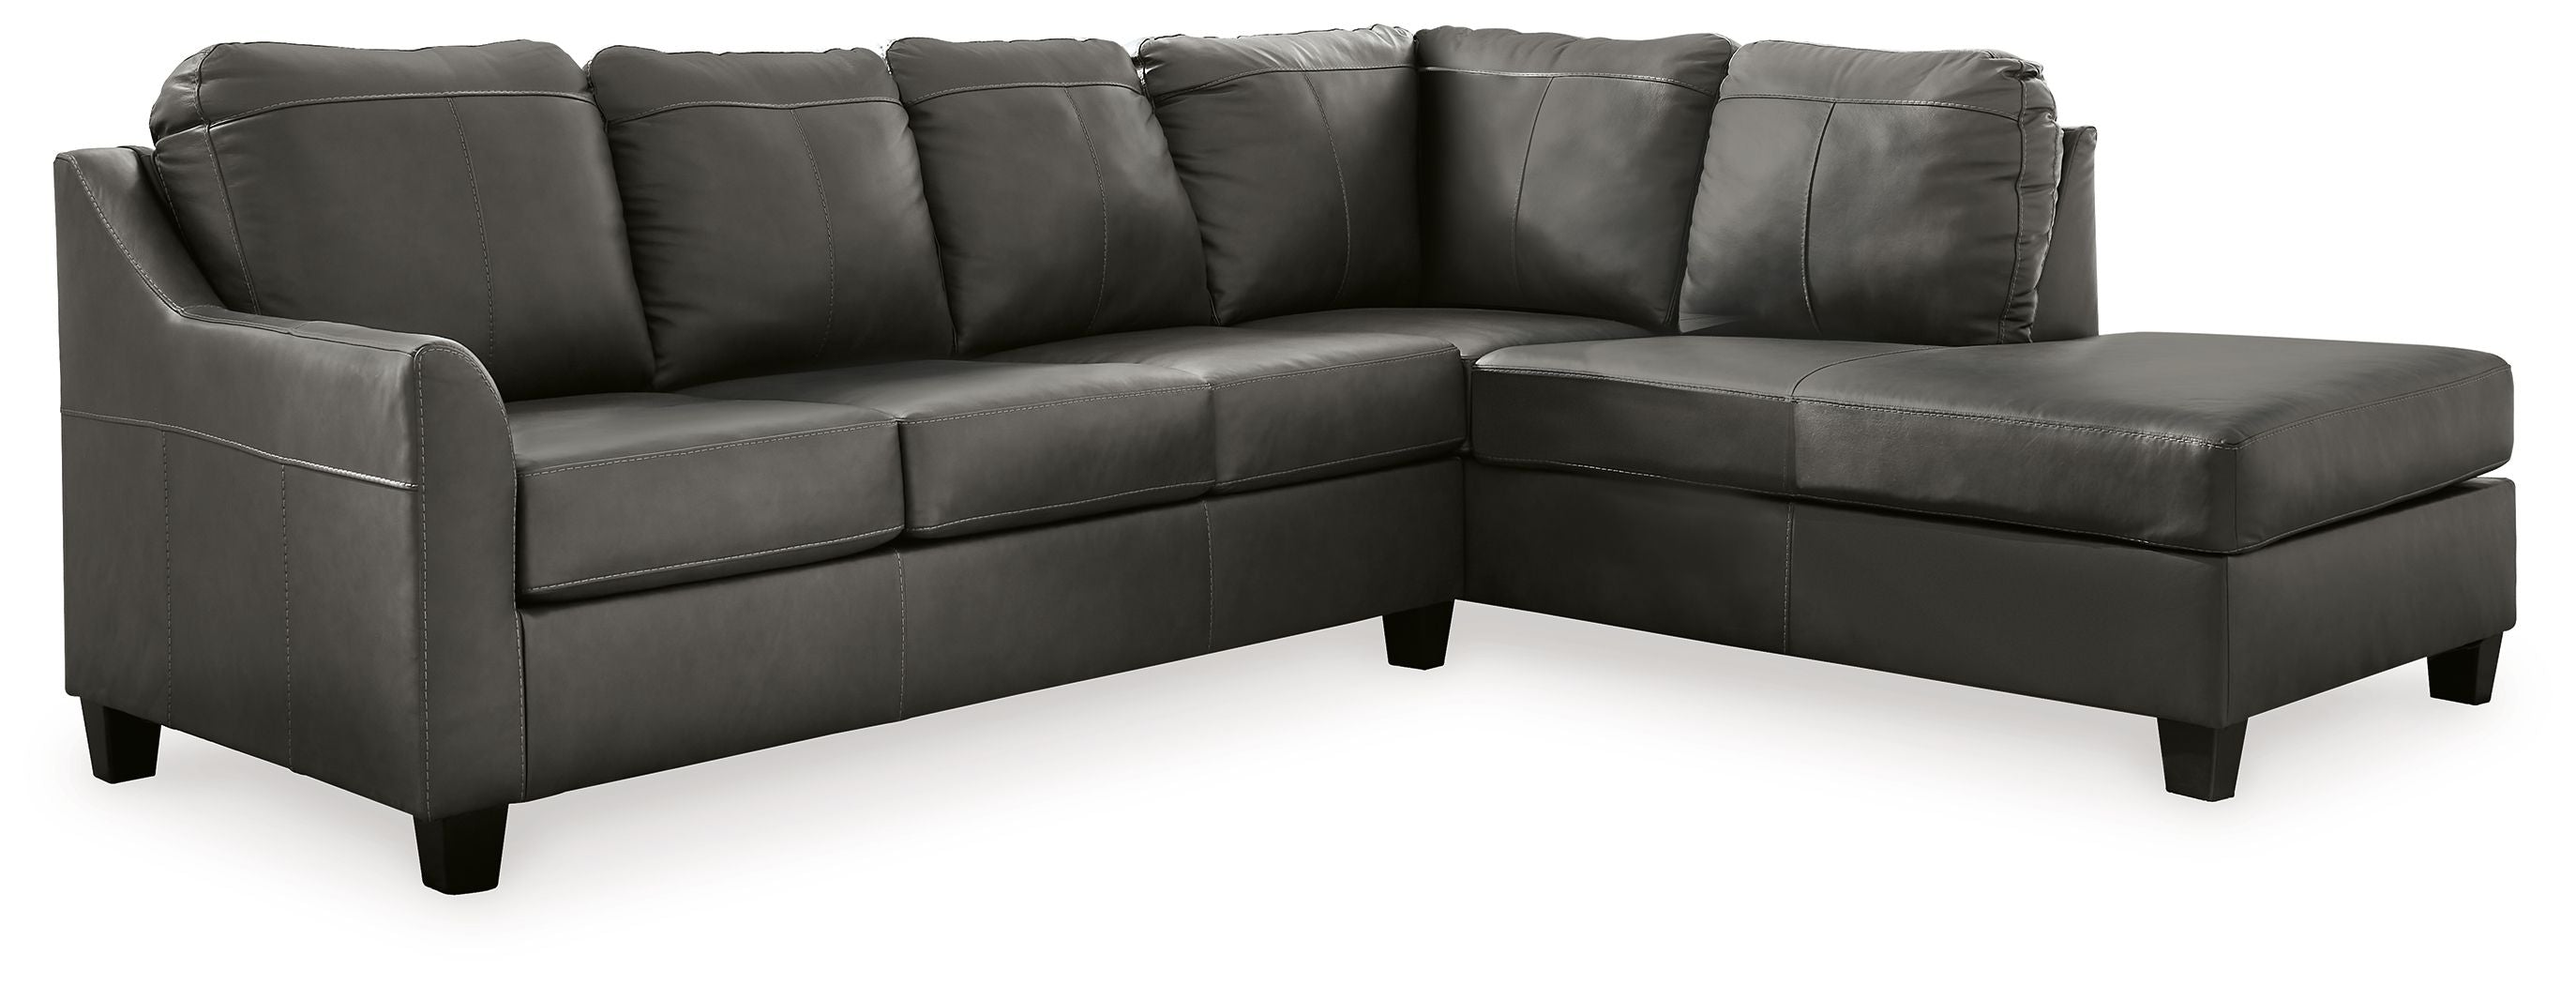 Valderno Fog Gray Leather 2-Piece Sectional-Stationary Sectionals-American Furniture Outlet